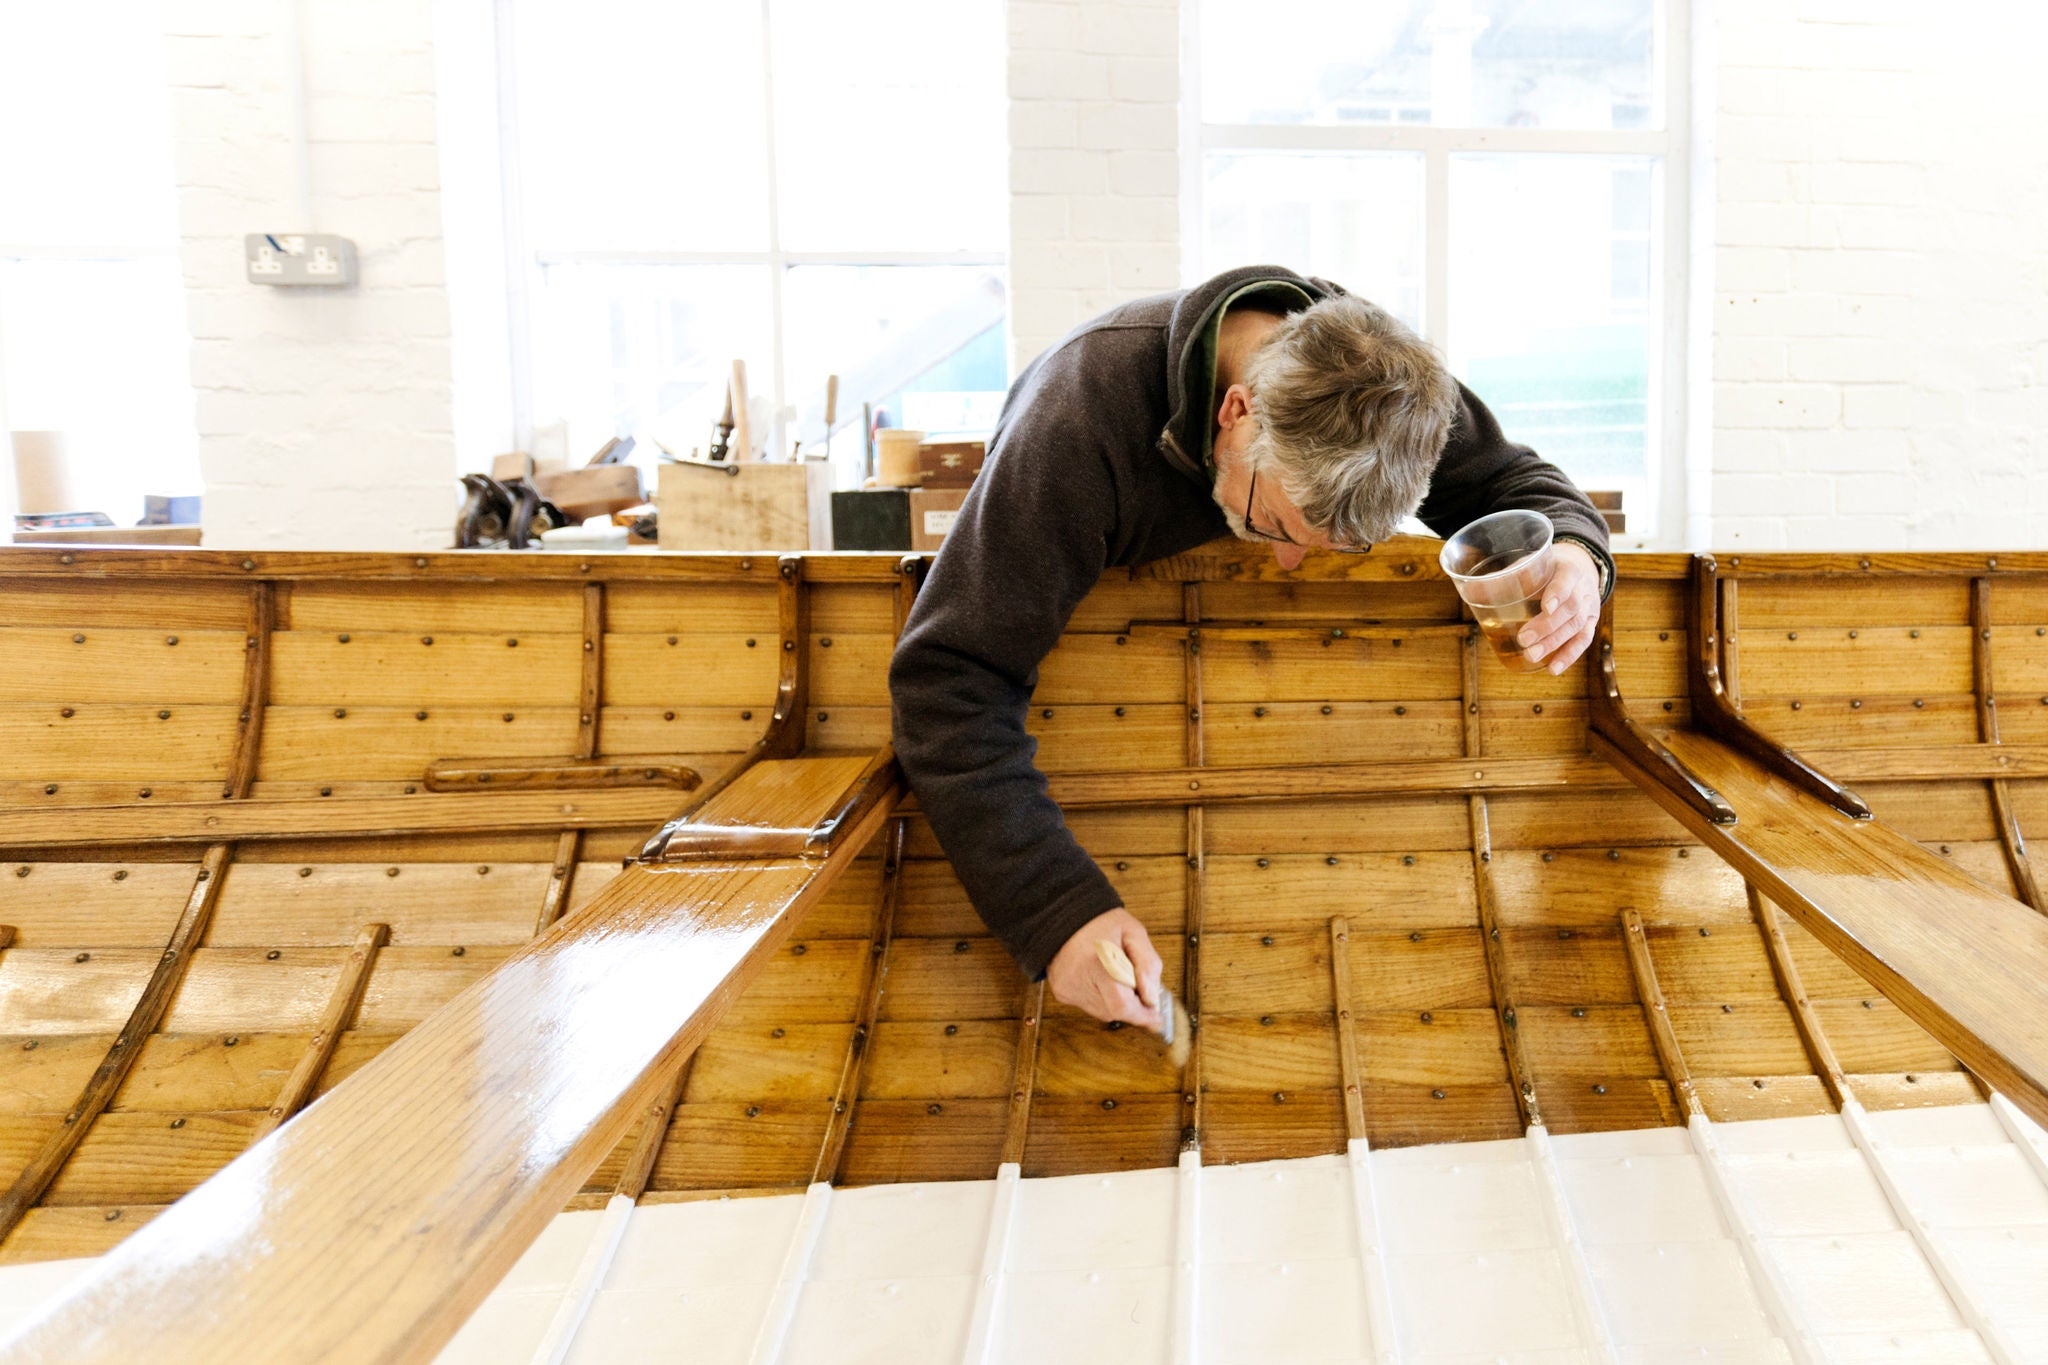 A boat builder paints varnish onto the interior of a traditional, hand built wooden gig boat